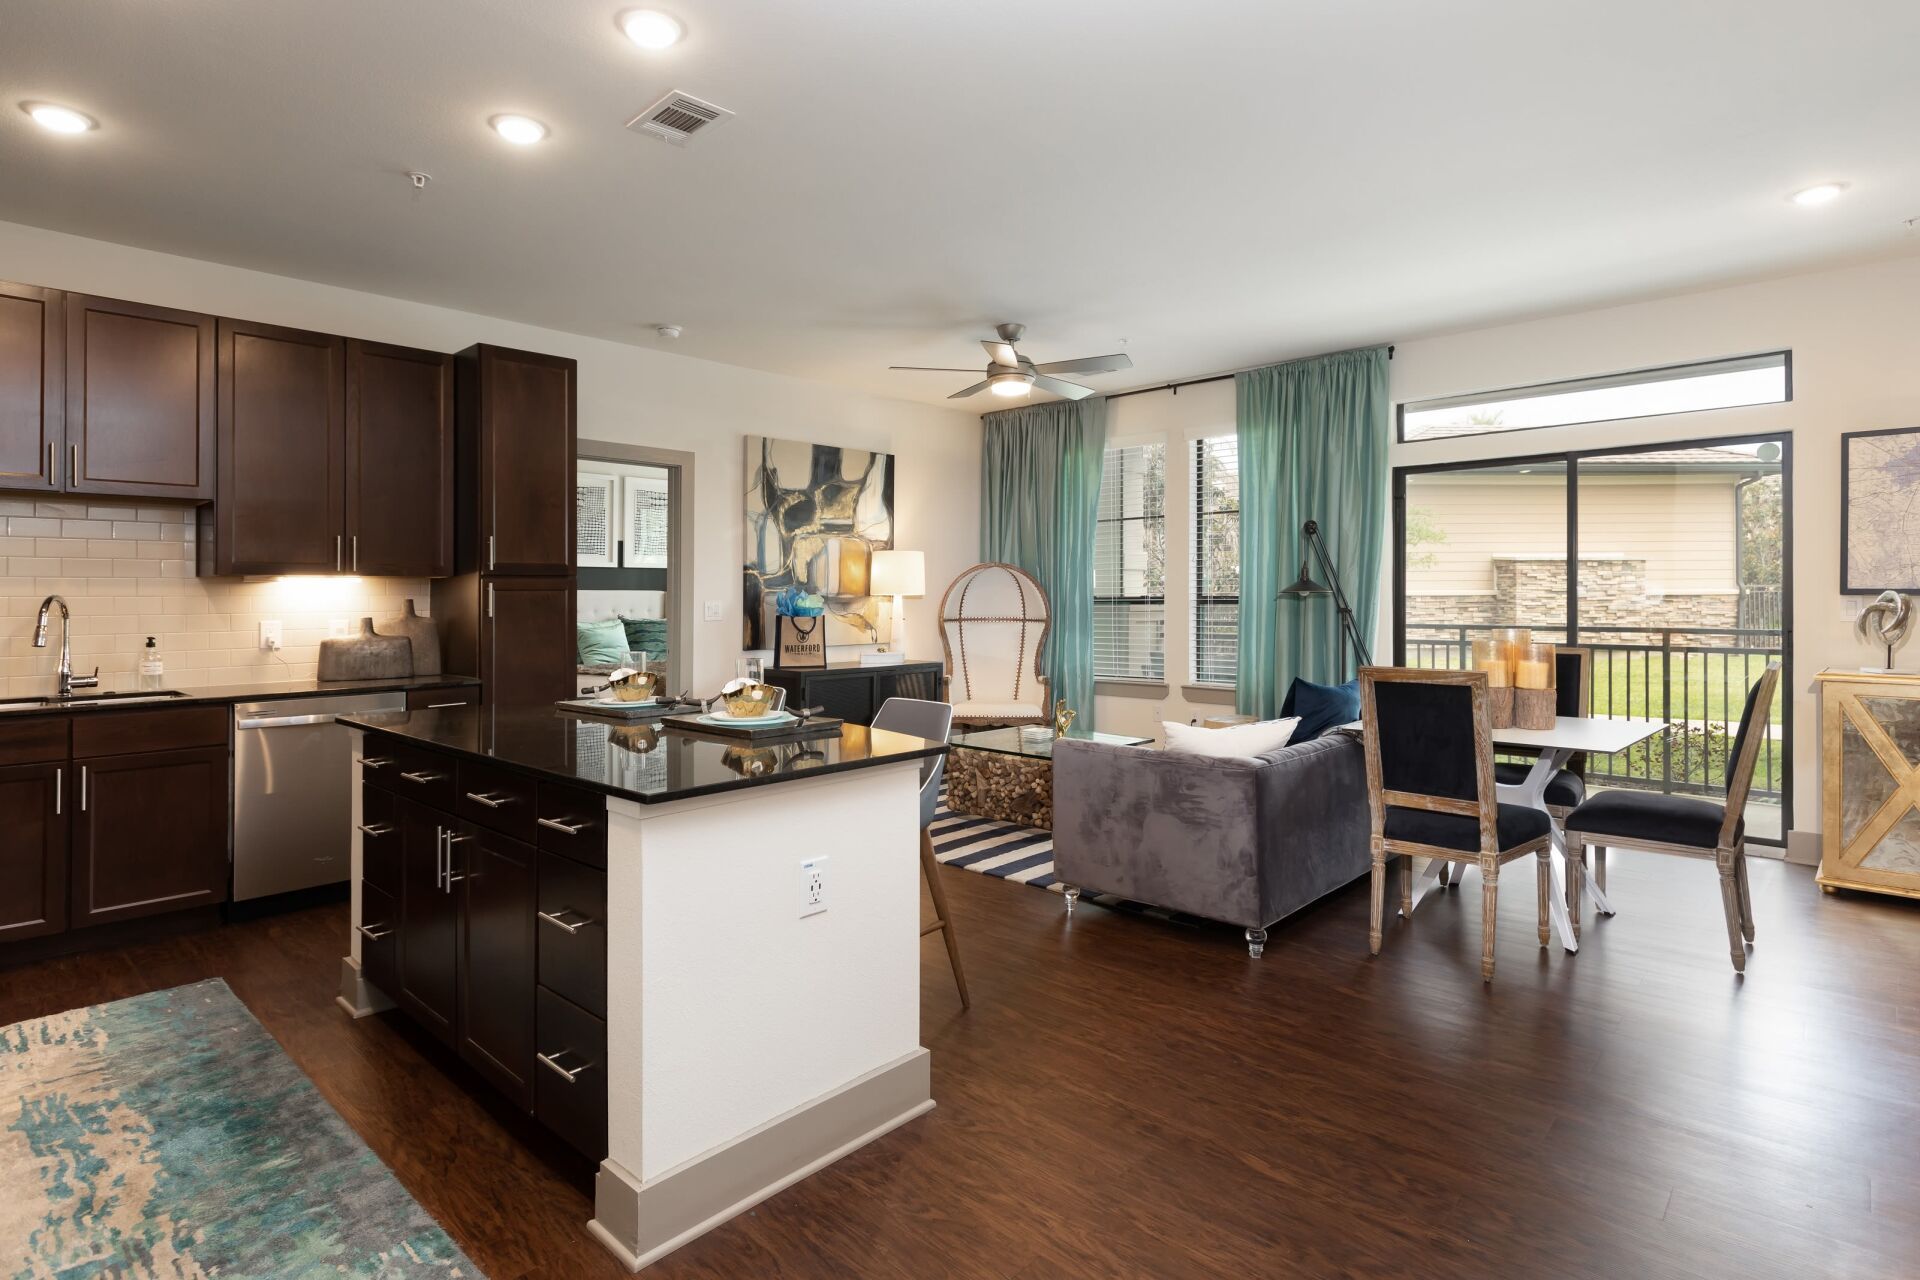 Equipped kitchen with kitchen island and living room view | Waterford Trails